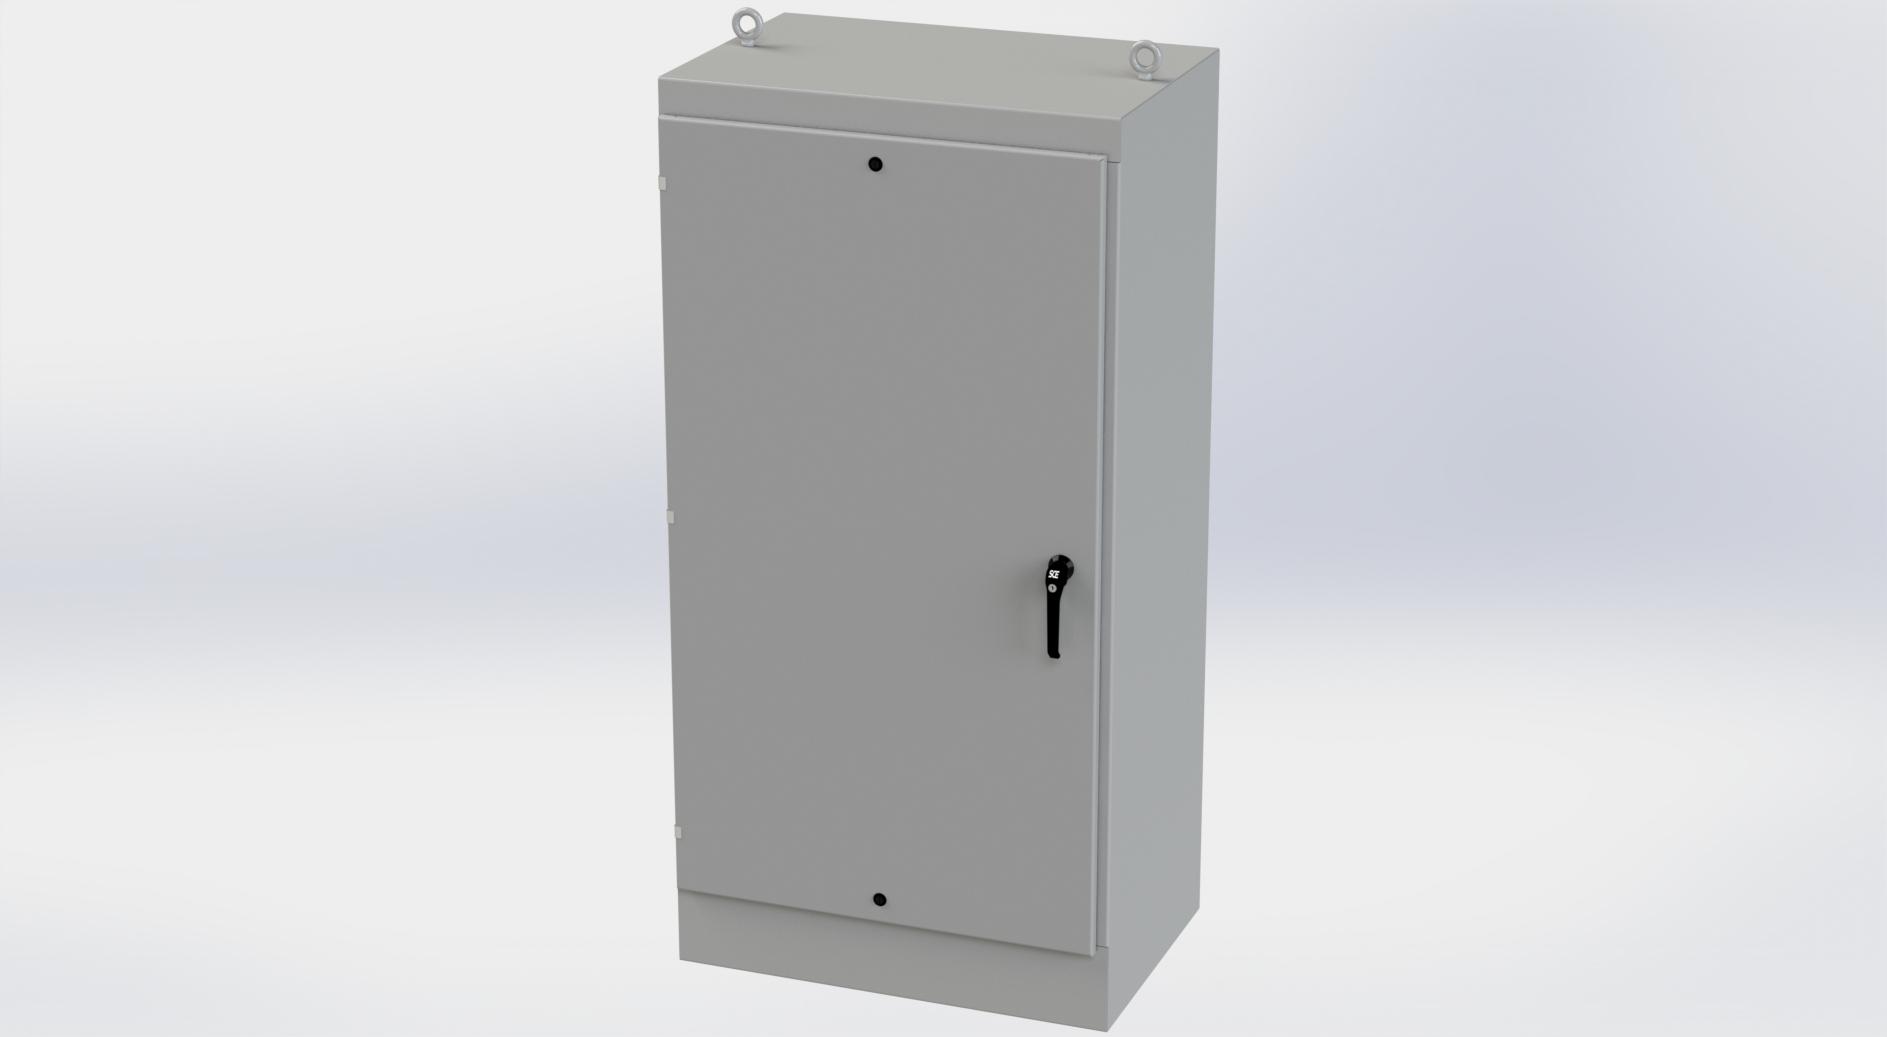 Saginaw Control SCE-72EL3624FS EL FS Enclosure, Height:72.00", Width:36.00", Depth:24.00", ANSI-61 gray powder coat inside and out. Optional sub-panels are powder coated white.